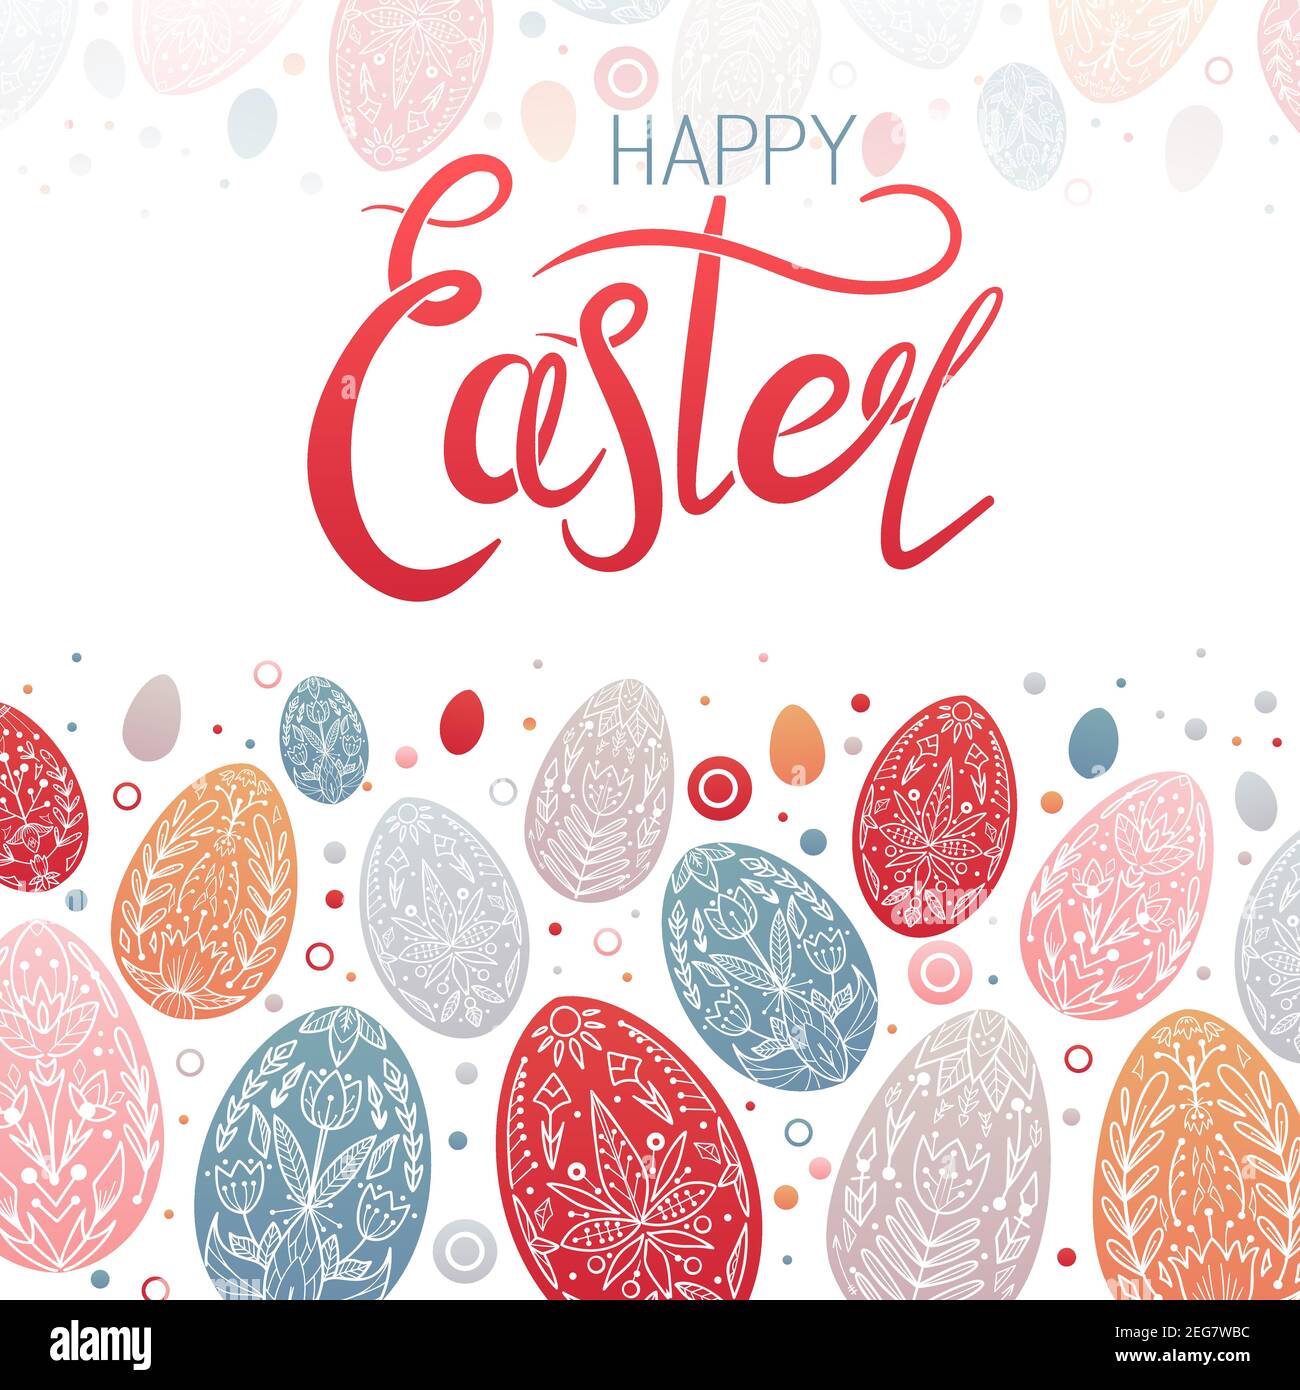 Happy Easter. Card of an Easter egg with geometric floral pattern with tribal decorations and lettering. Festive spring treat with wishes. Postcard wi Stock Vector